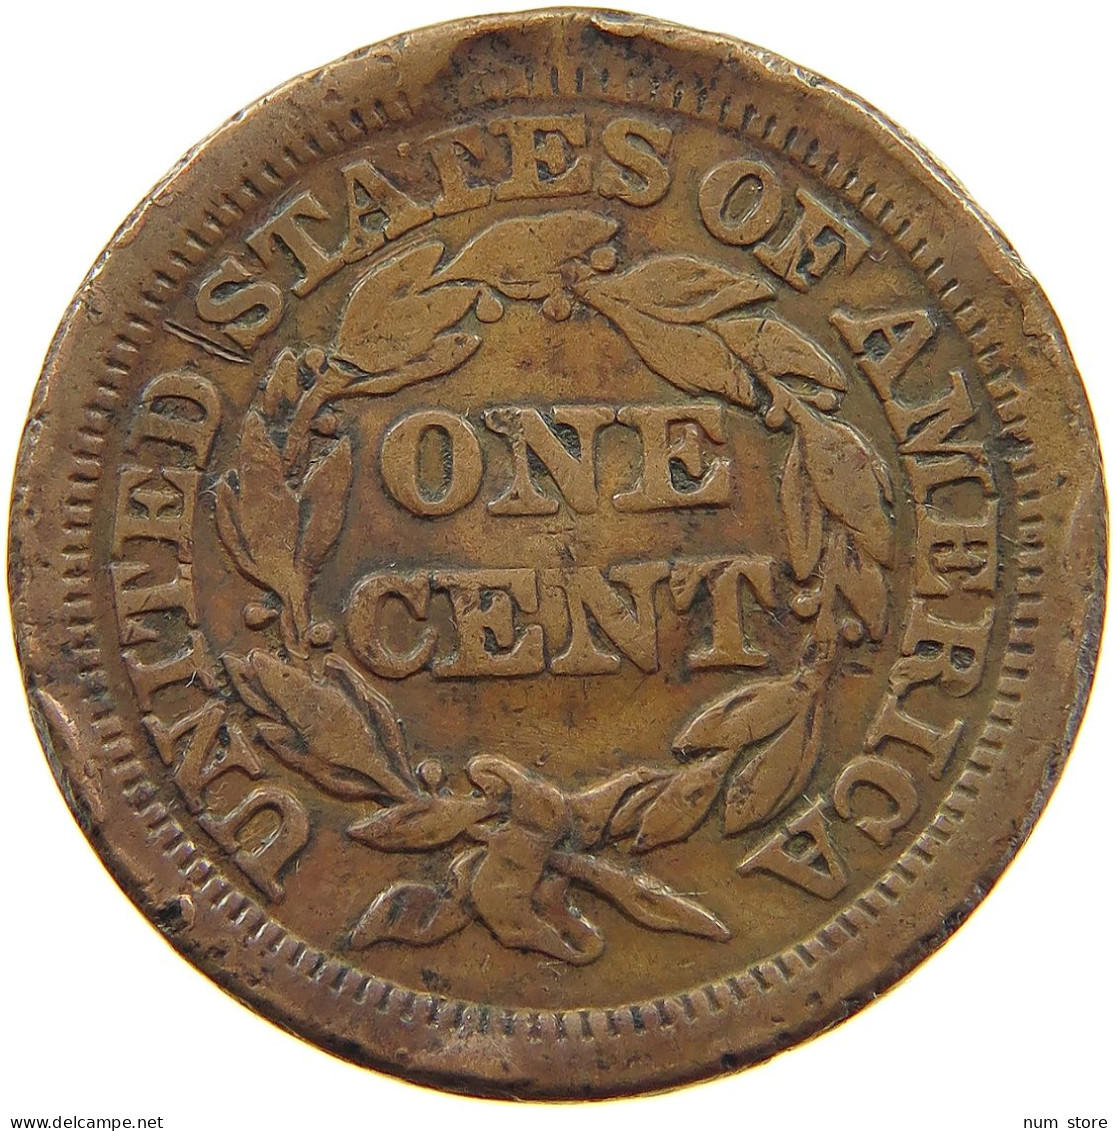 UNITED STATES OF AMERICA LARGE CENT 1853 Braided Hair #a007 0339 - 1840-1857: Braided Hair (Cheveux Tressés)